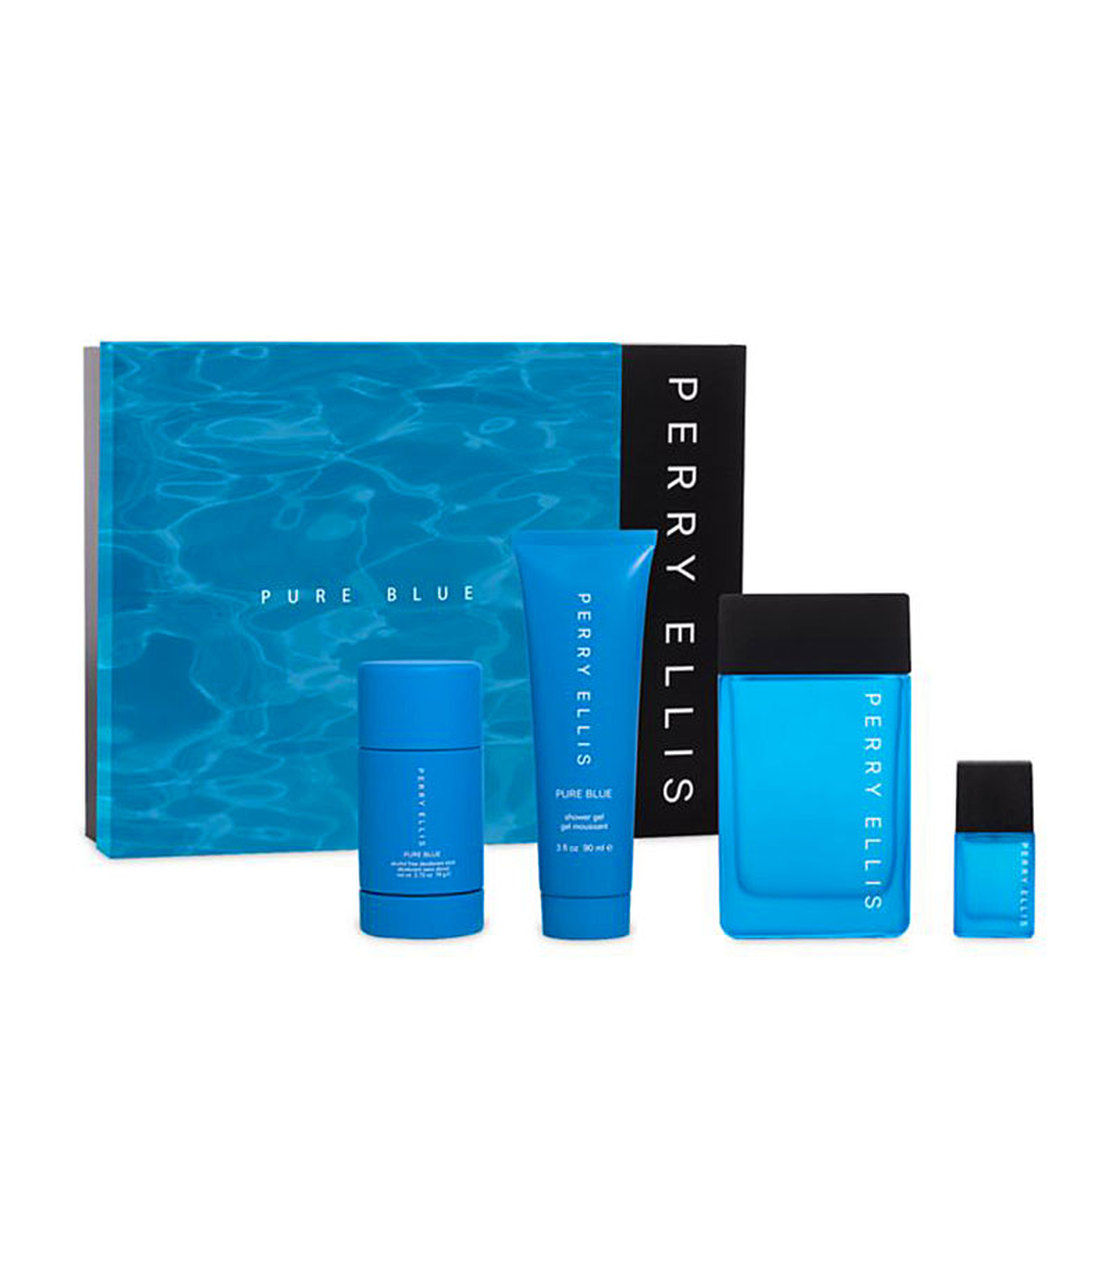 Perry Ellis Mens Pure Blue Gift Set Fragrances 844061012479 In Blue,green,white